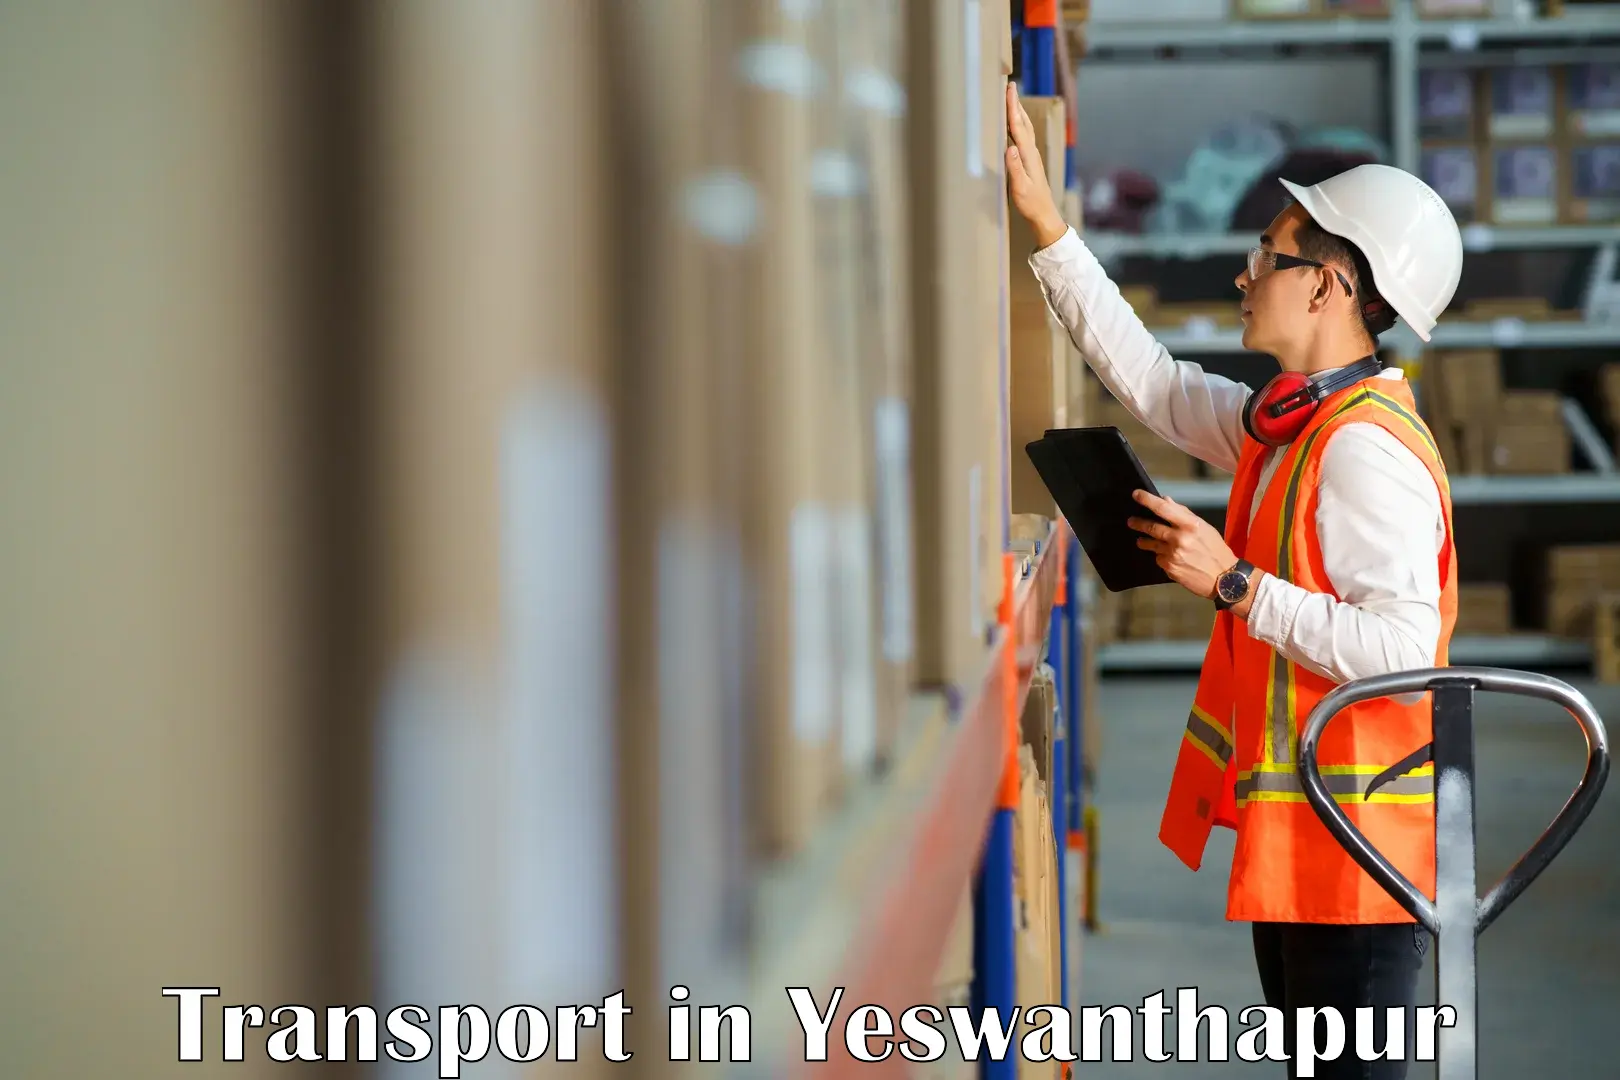 Transport shared services in Yeswanthapur